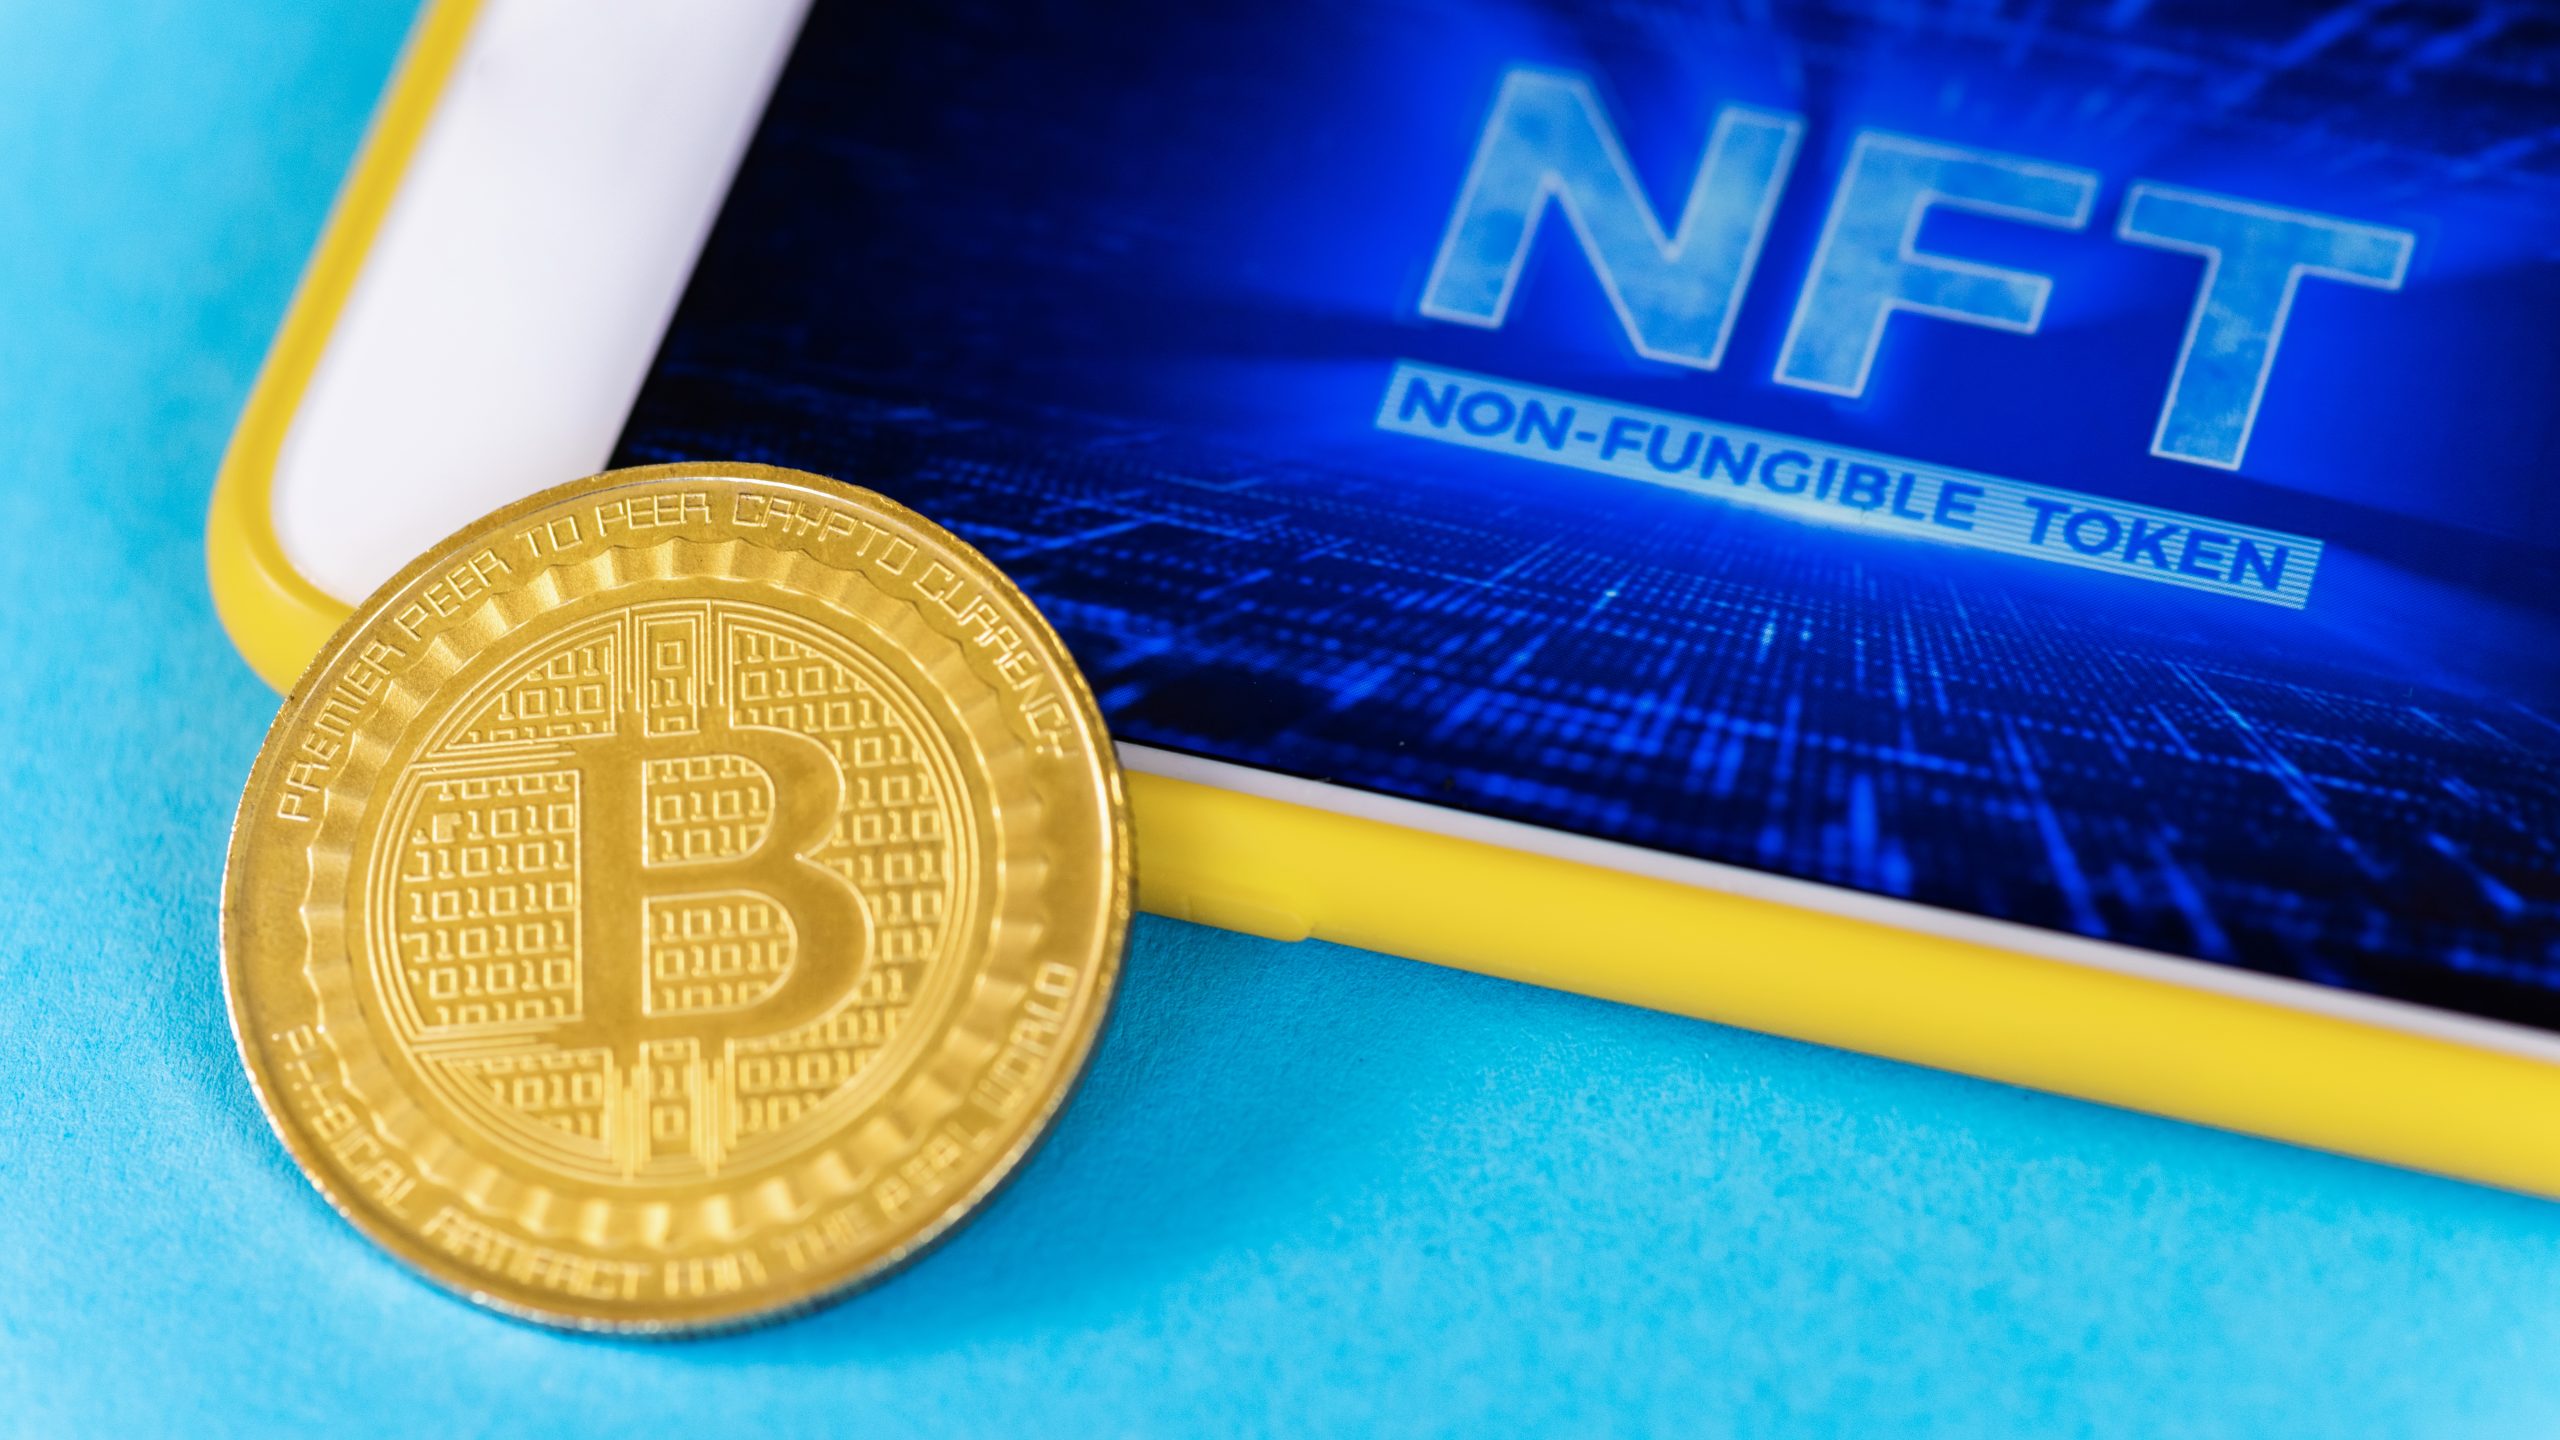 Physical Bitcoin gold coin and smartphone with NFT in it, blue background